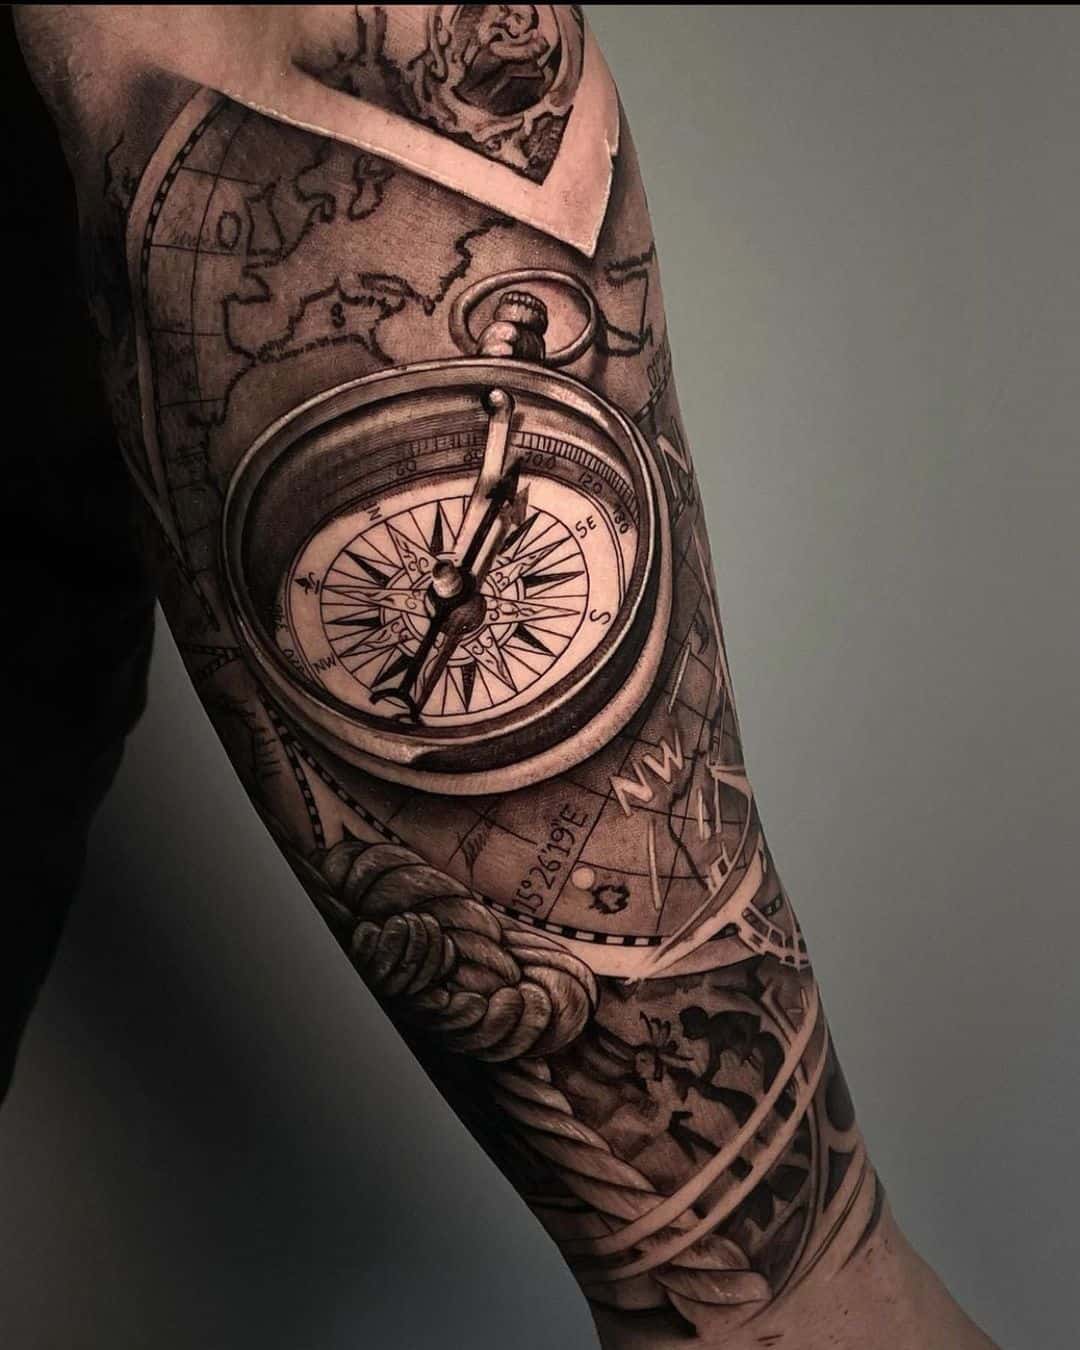 SIMPLE FOREARM COMPASS TATTOO DESIGNS | Compass tattoo, Compass tattoo  design, Arrow tattoo on wrist